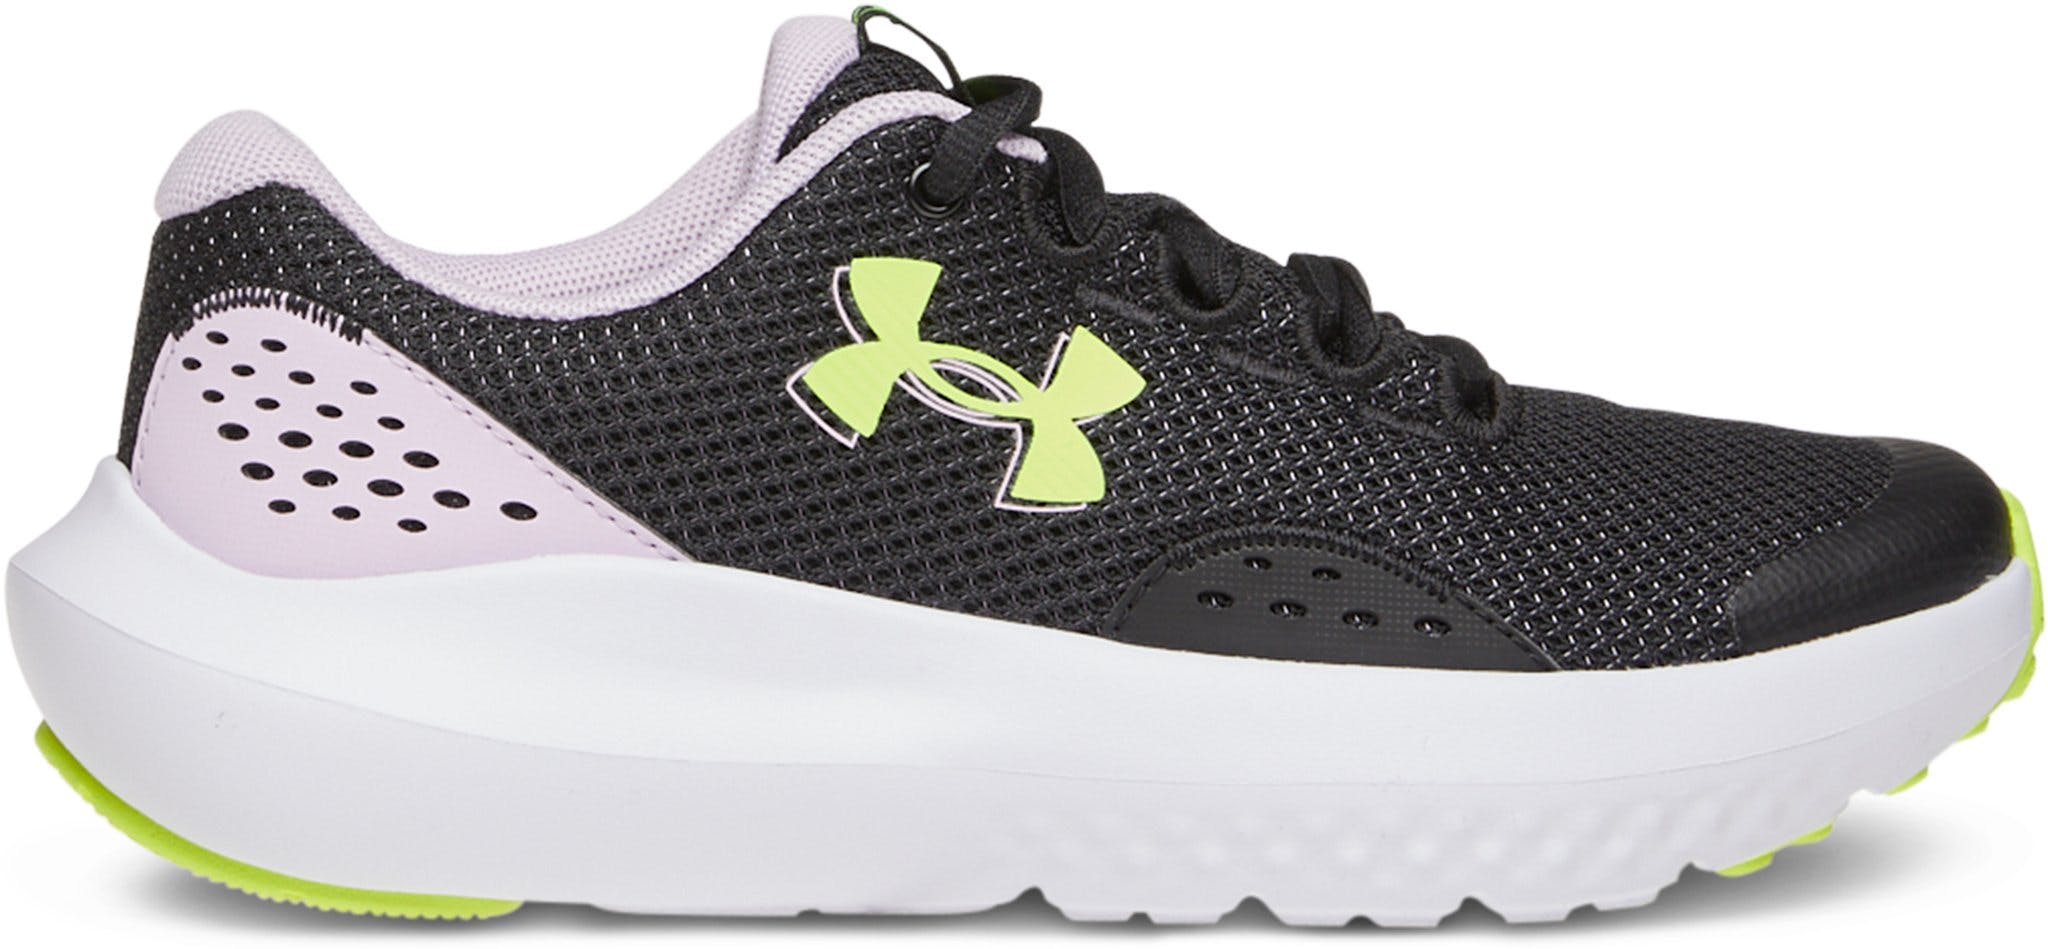 Product image for Grade School UA Surge 4 Running Shoes - Girls